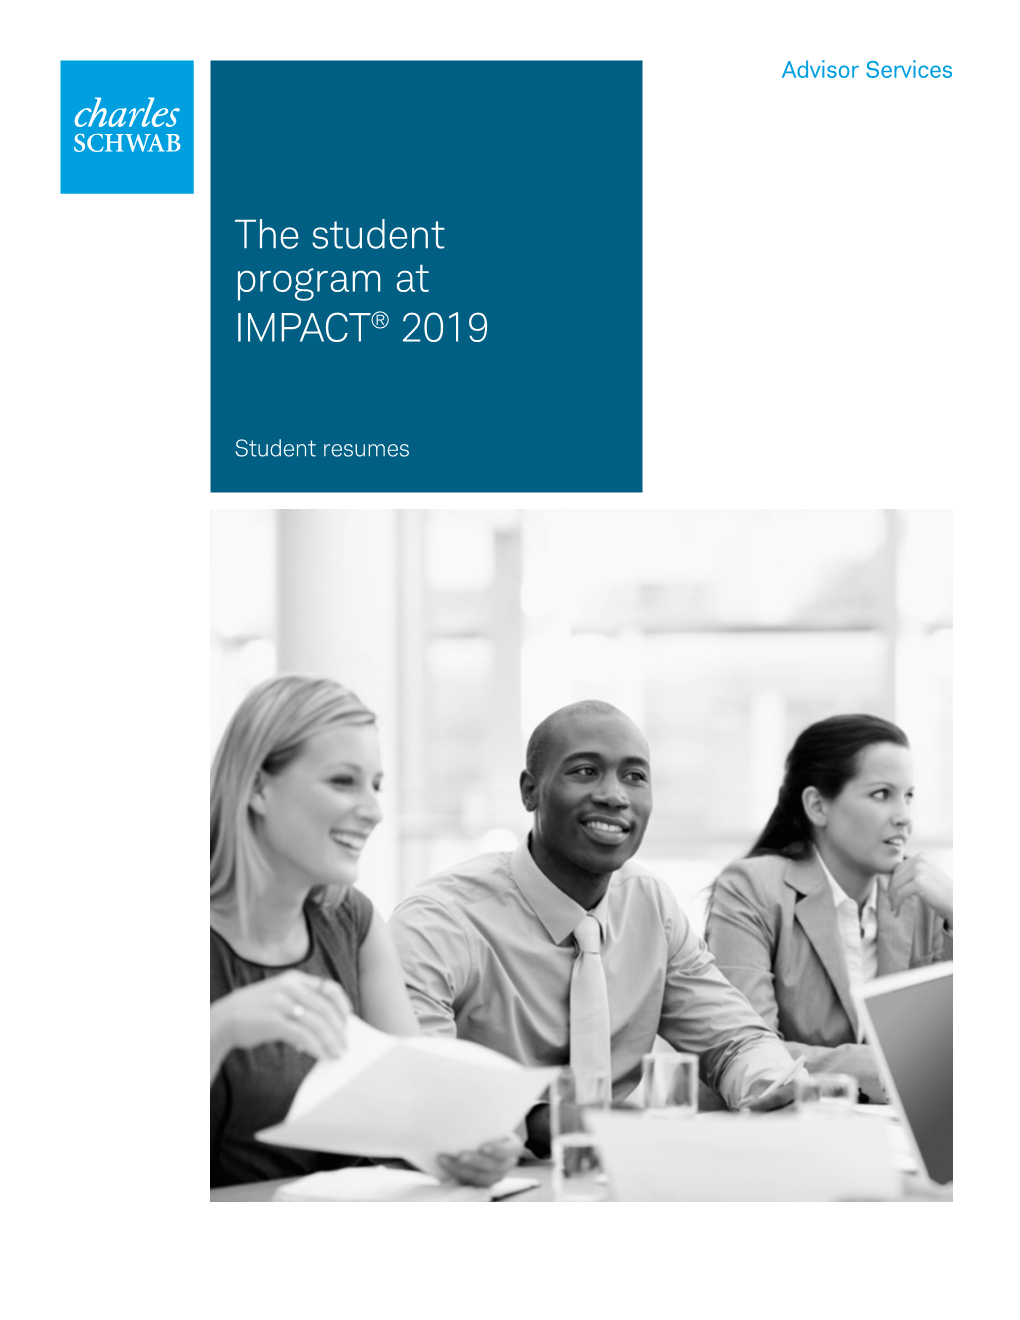 The Student Program at IMPACT® 2019